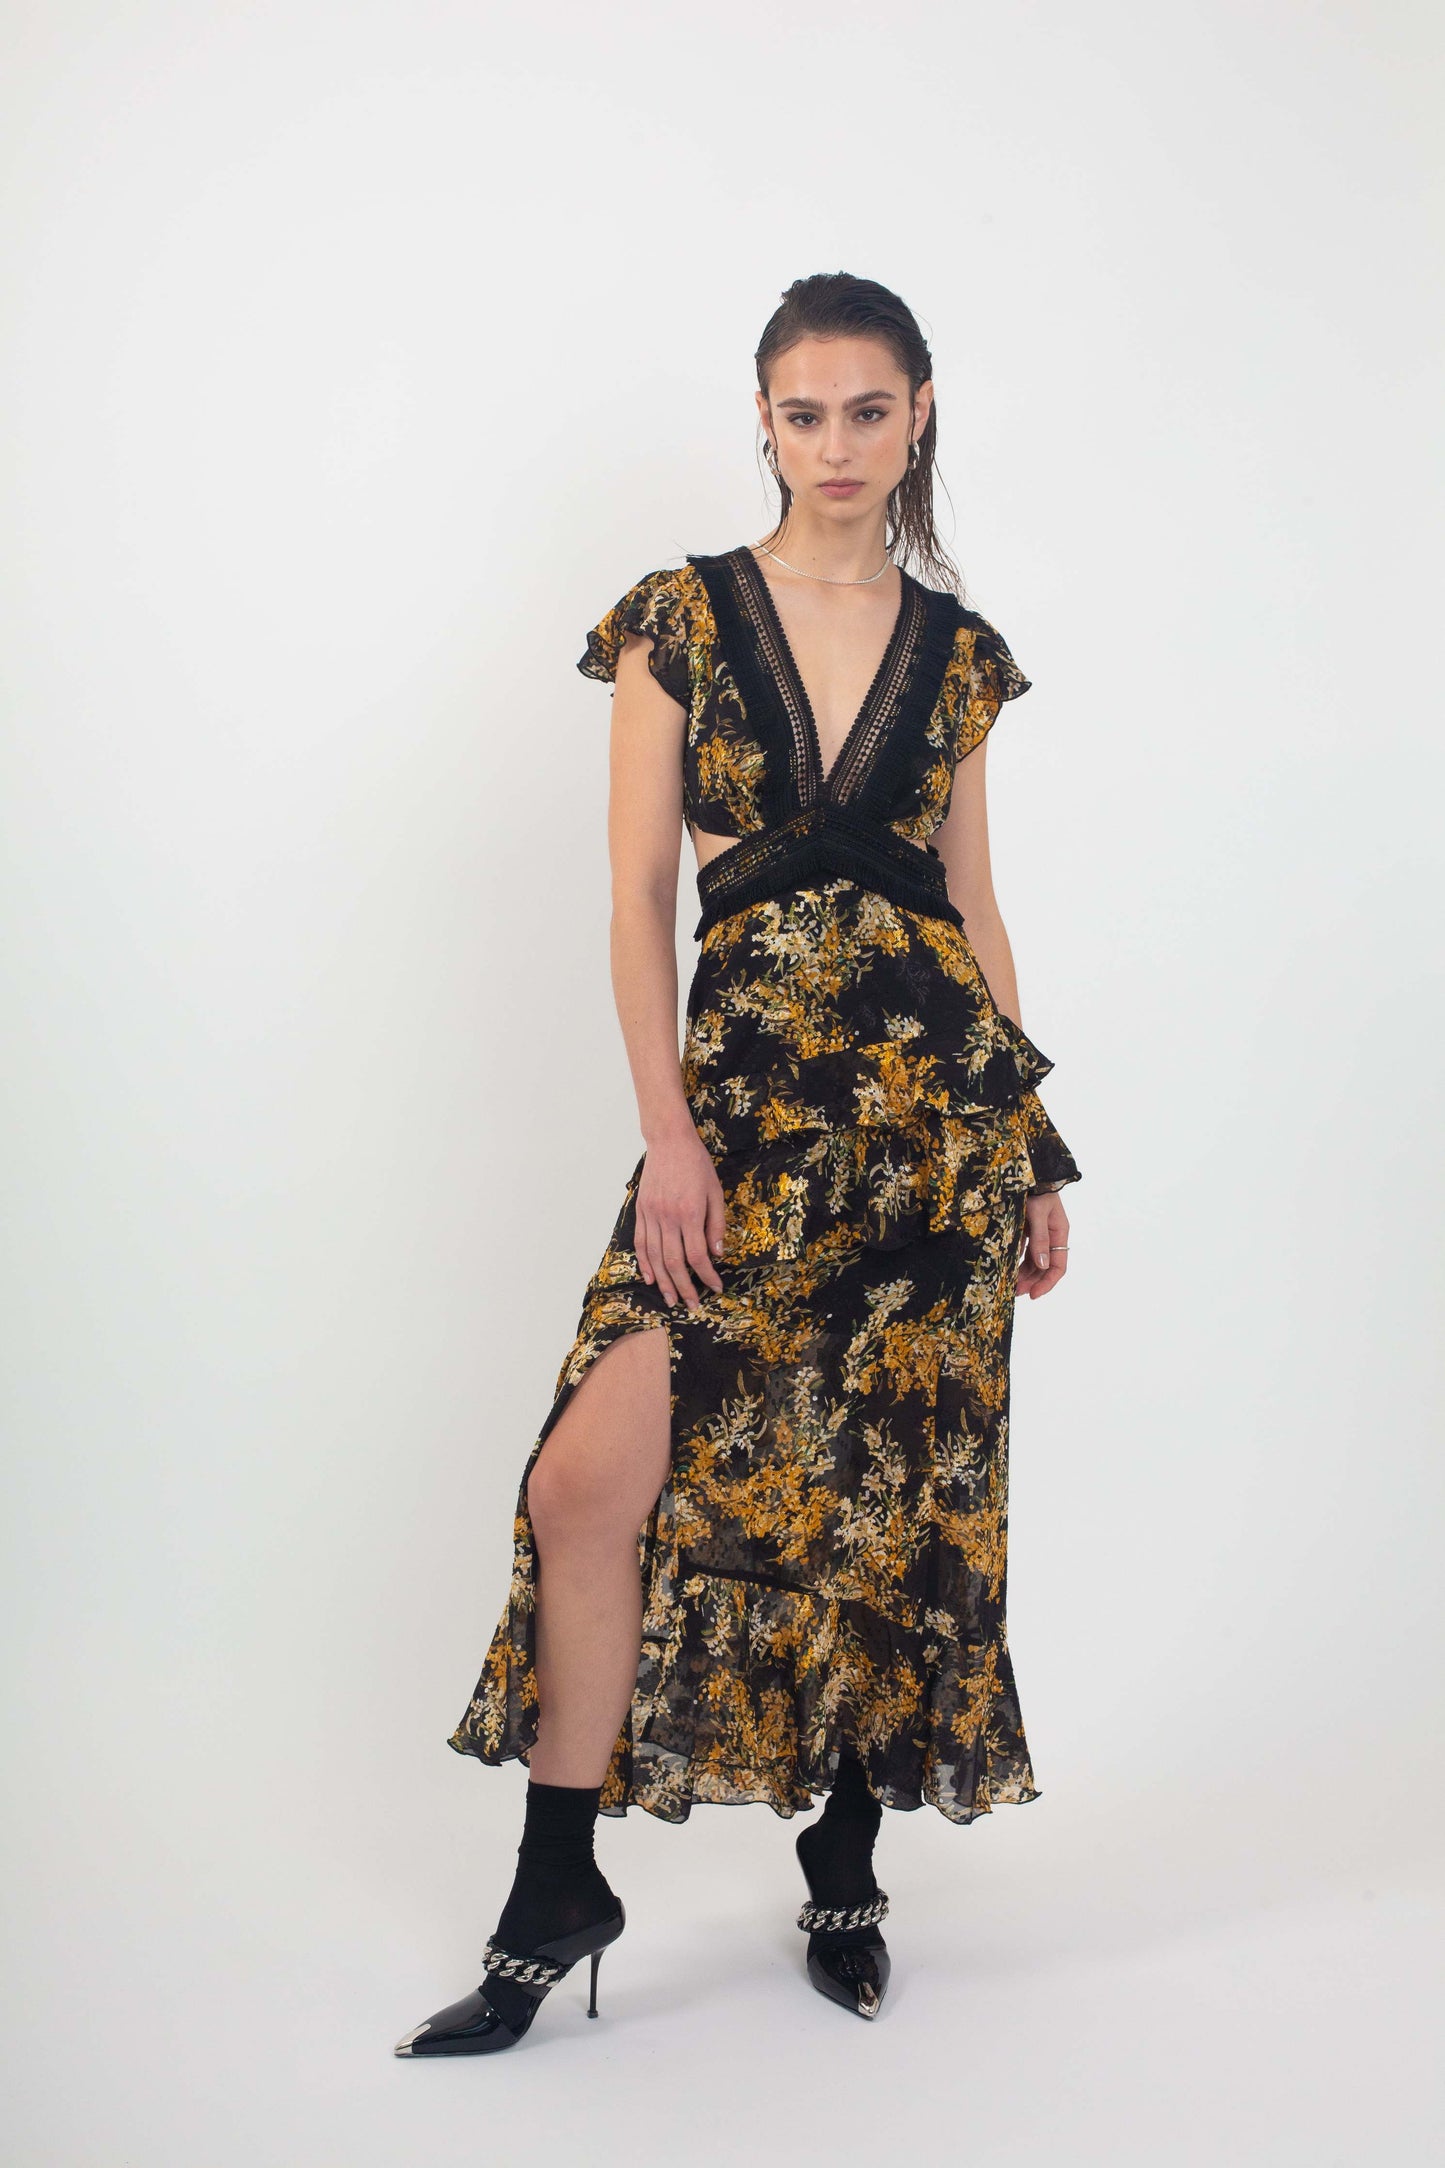 'Pisces' Yellow Floral Maxi Dress